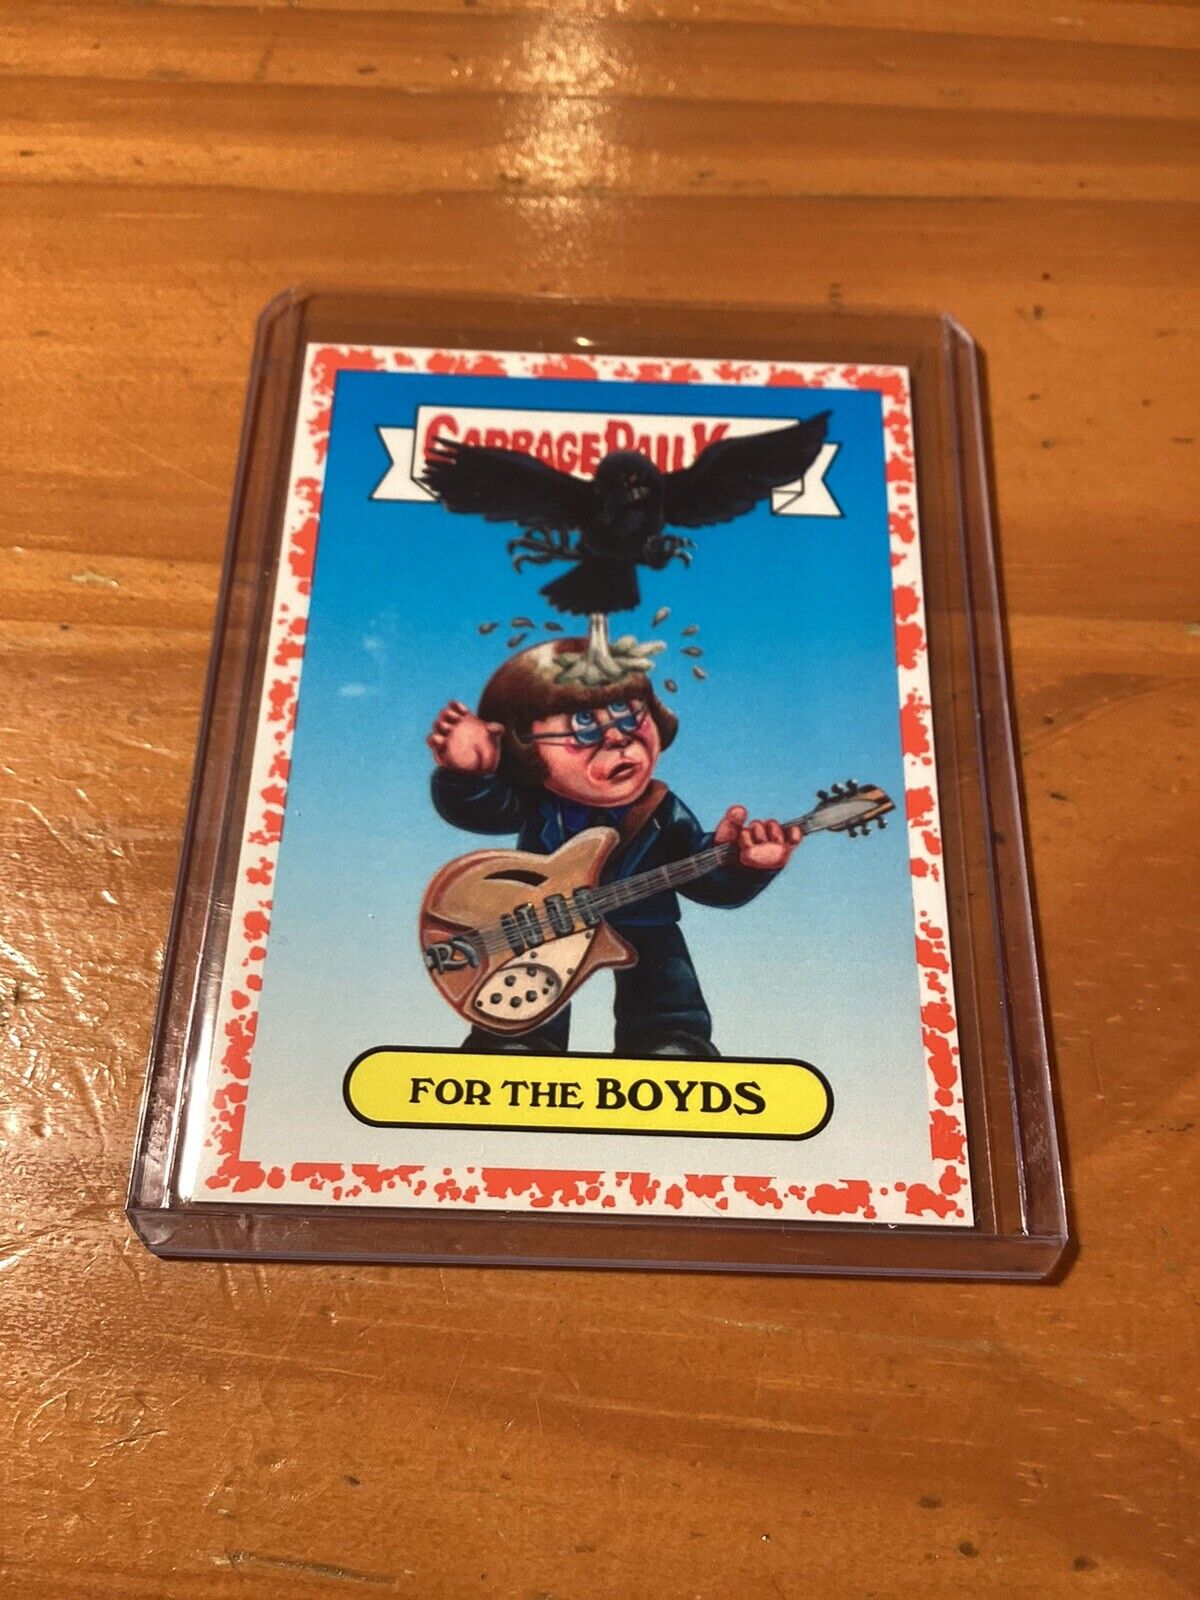 2017 Topps Garbage Pail Kids The Byrds Card 6A Red #/75 Battle Of The Bands